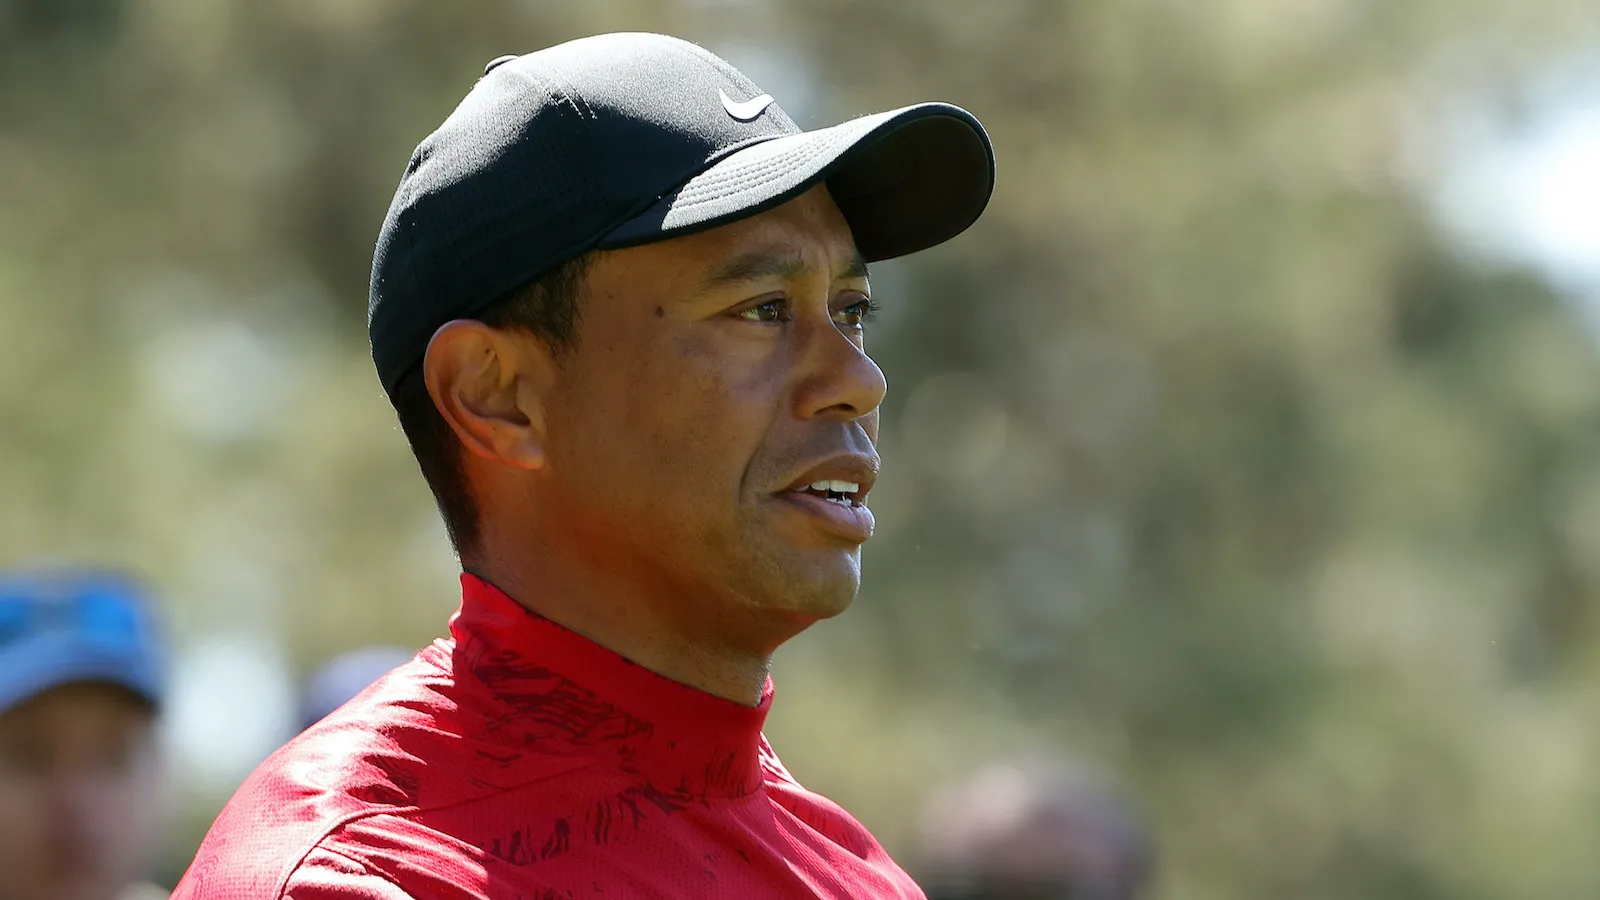 How much money did Tiger Woods make at the 2022 Masters?